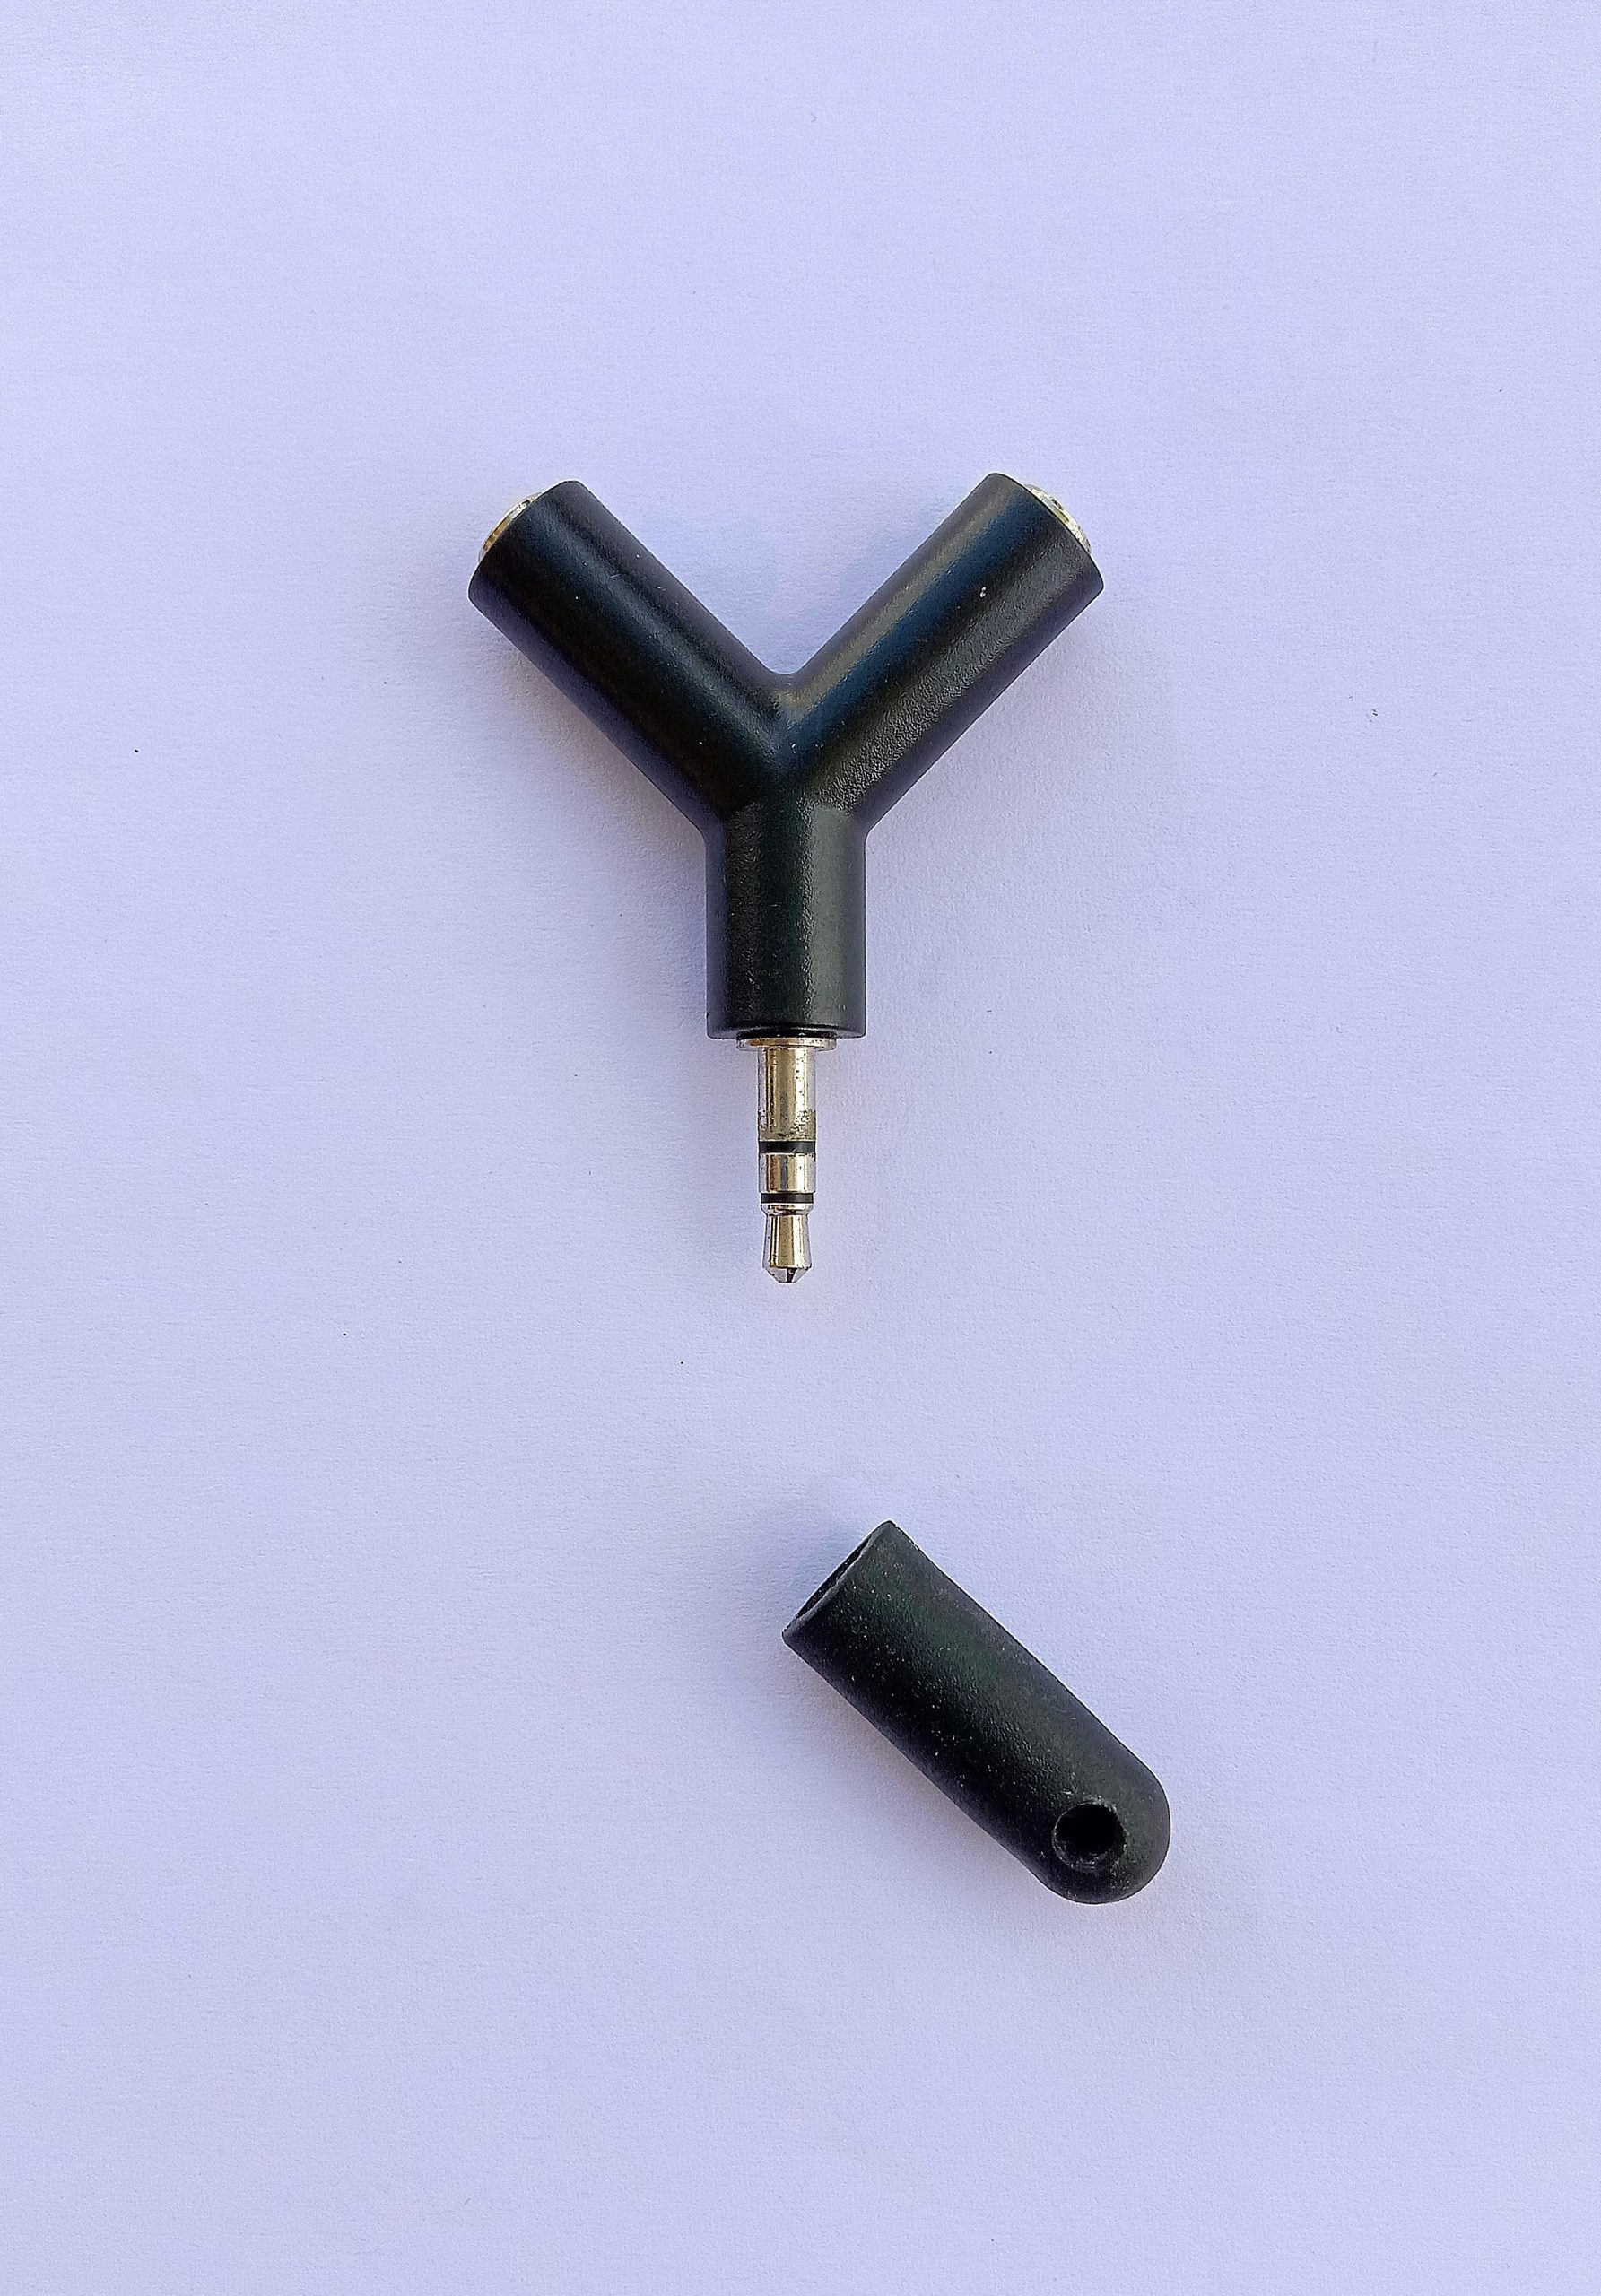 Two way ear phone adapter